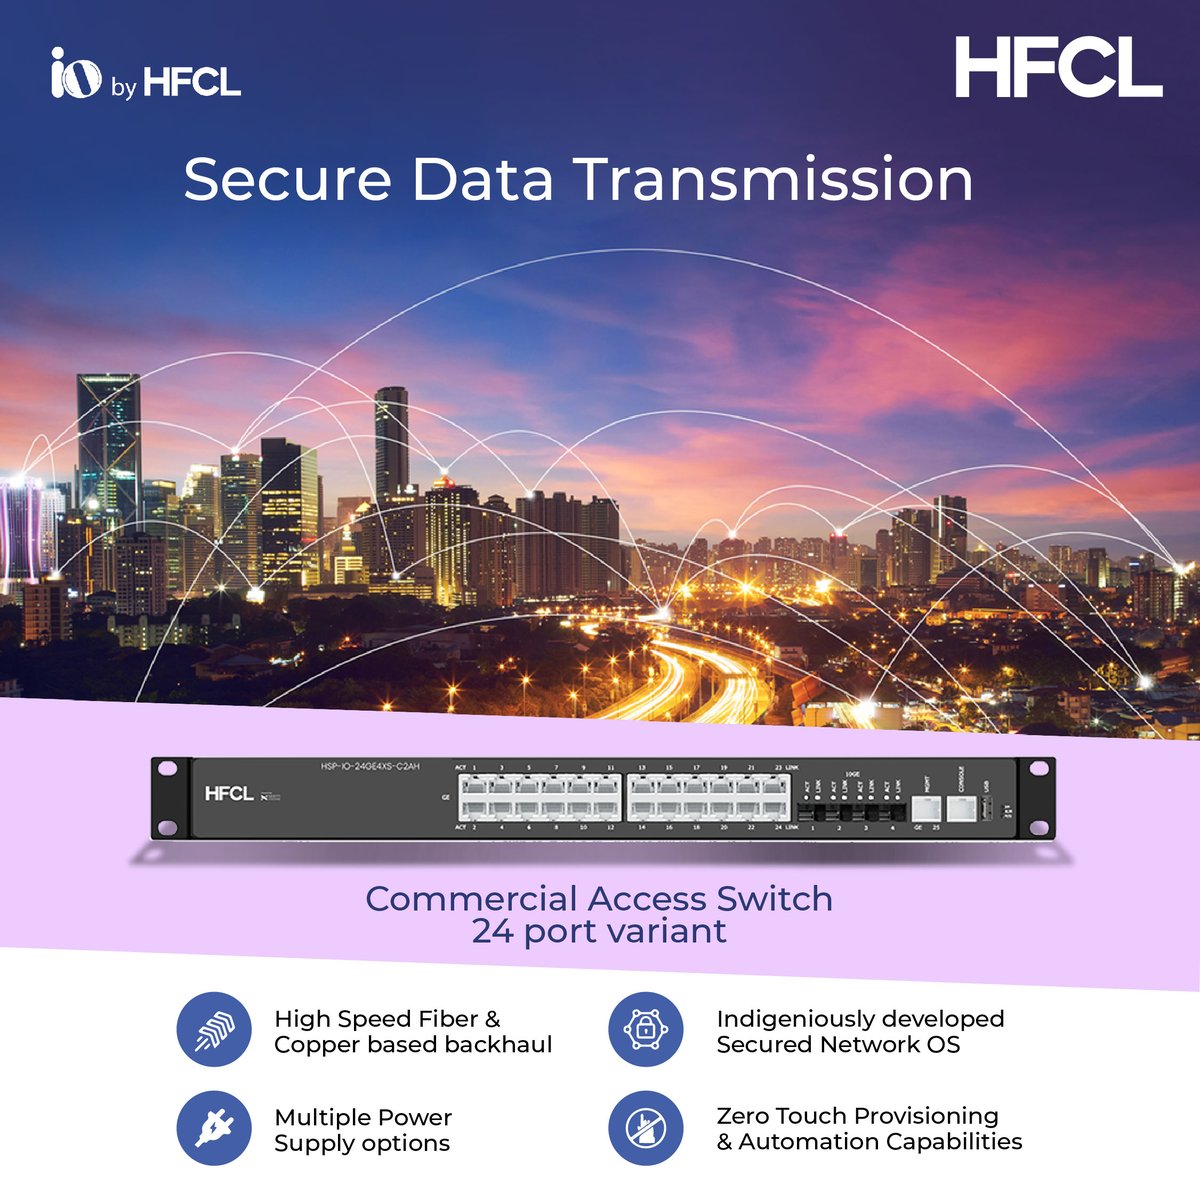 IO by HFCL’s carrier-grade all gigabit switches deliver optimized secure edge solutions for digital-ready wired & #wireless networking applications.
They enable multiple use cases like #WiFi APs, #CCTV, Data centers & small cells in the Enterprise environment.
#networkswitch